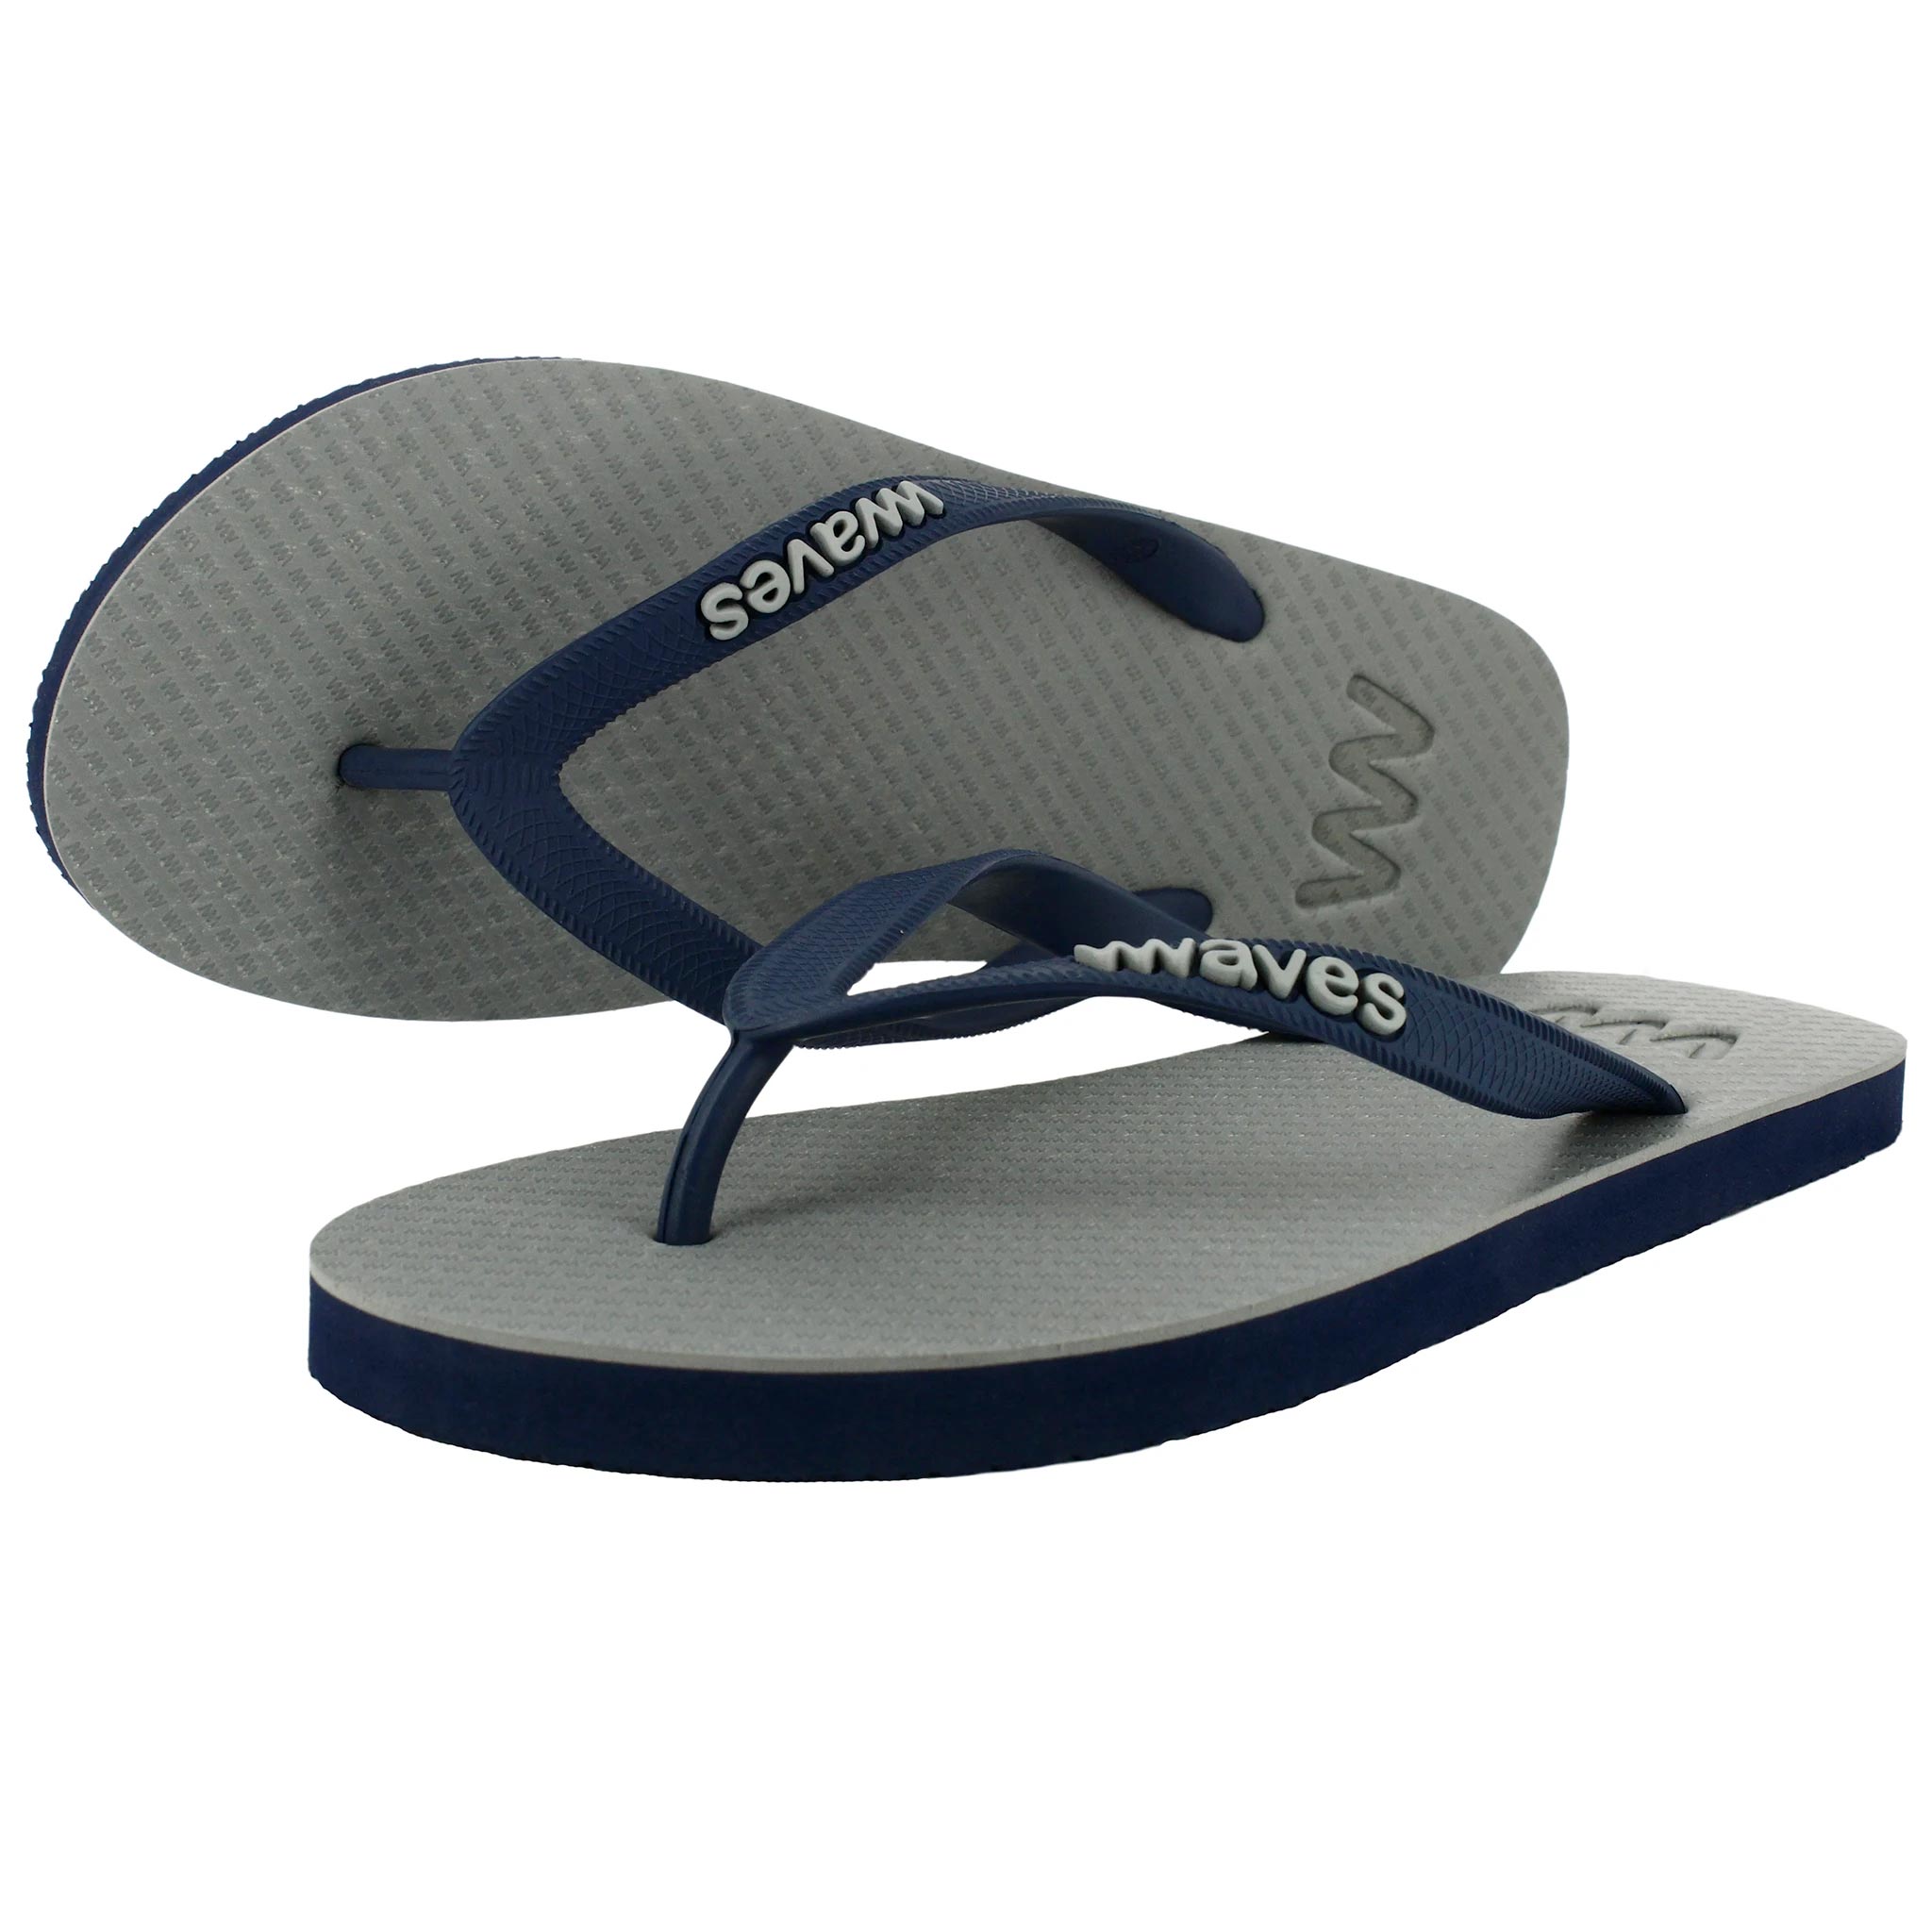 100% natural rubber flip flop – grey with navy soles - 5